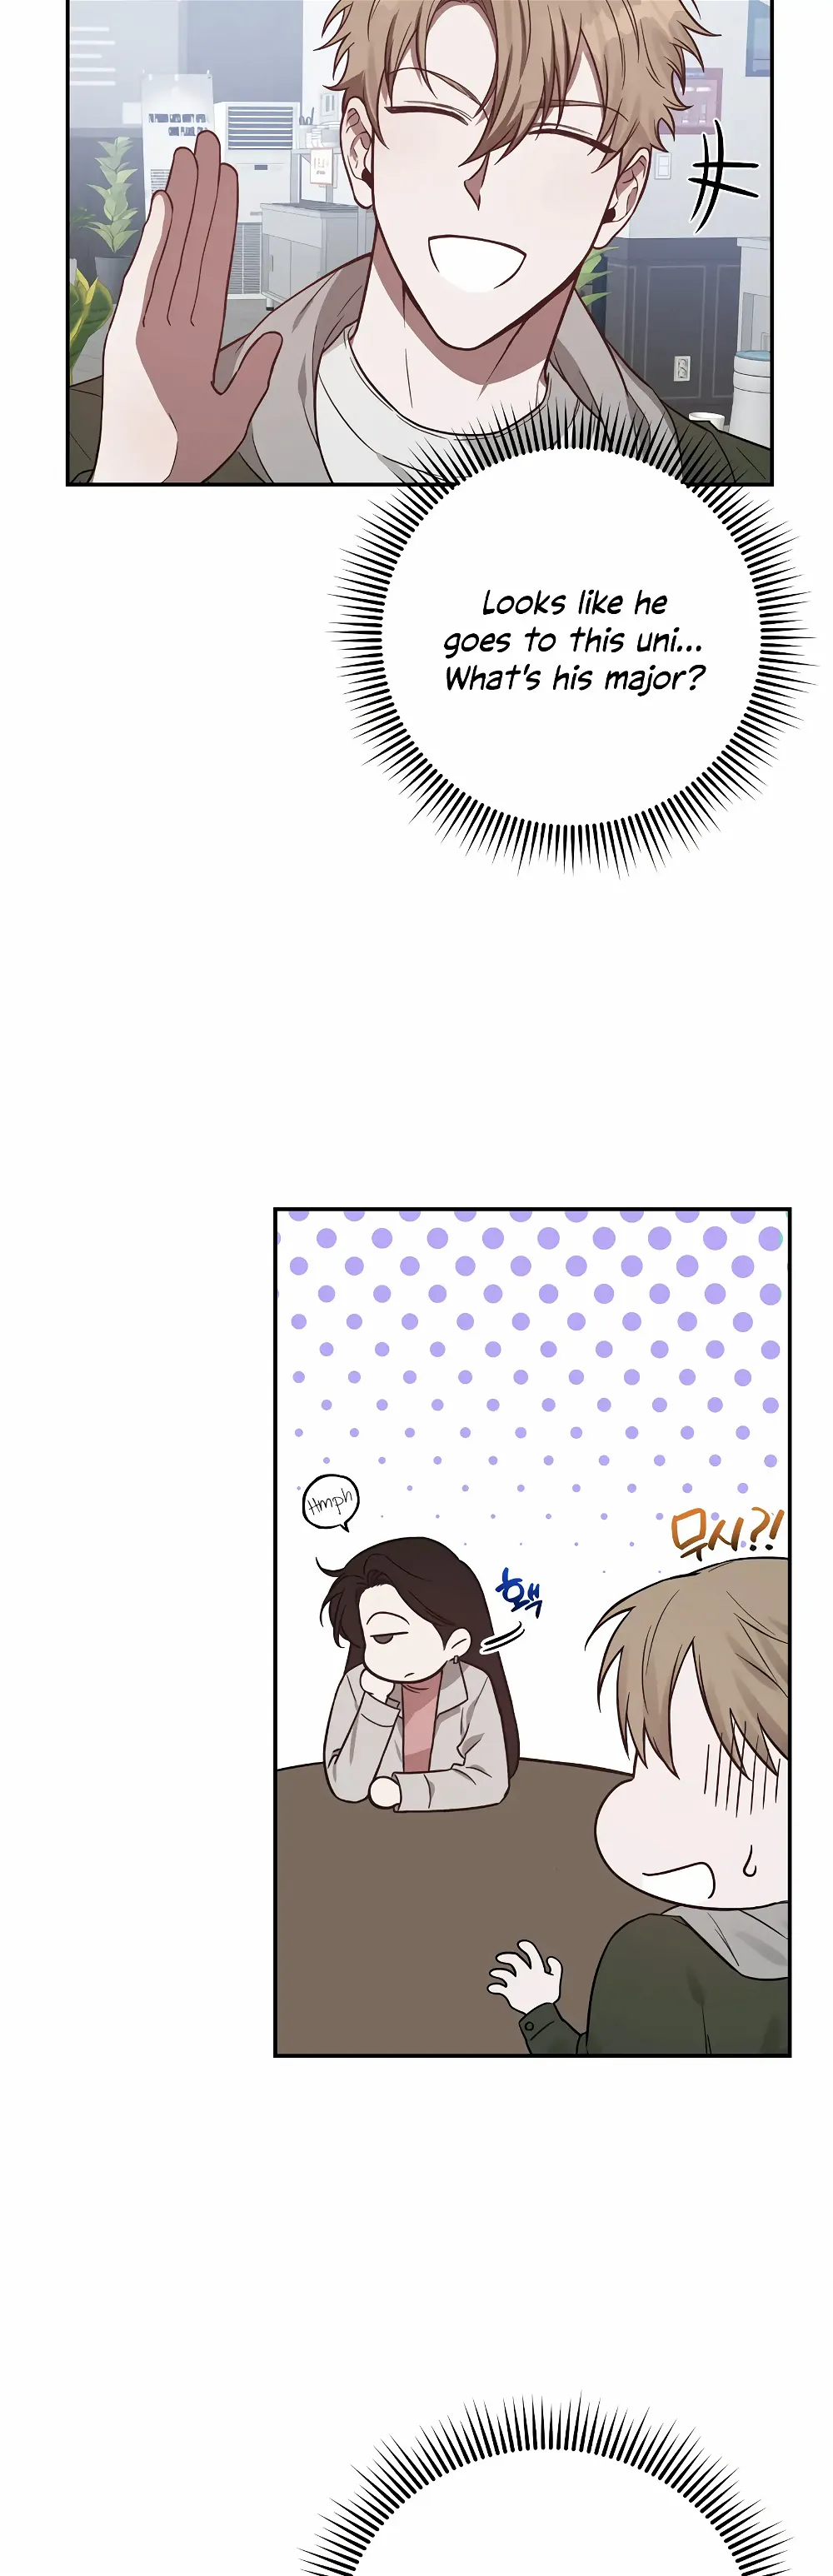 Mijeong’s Relationships chapter 5 - Page 5